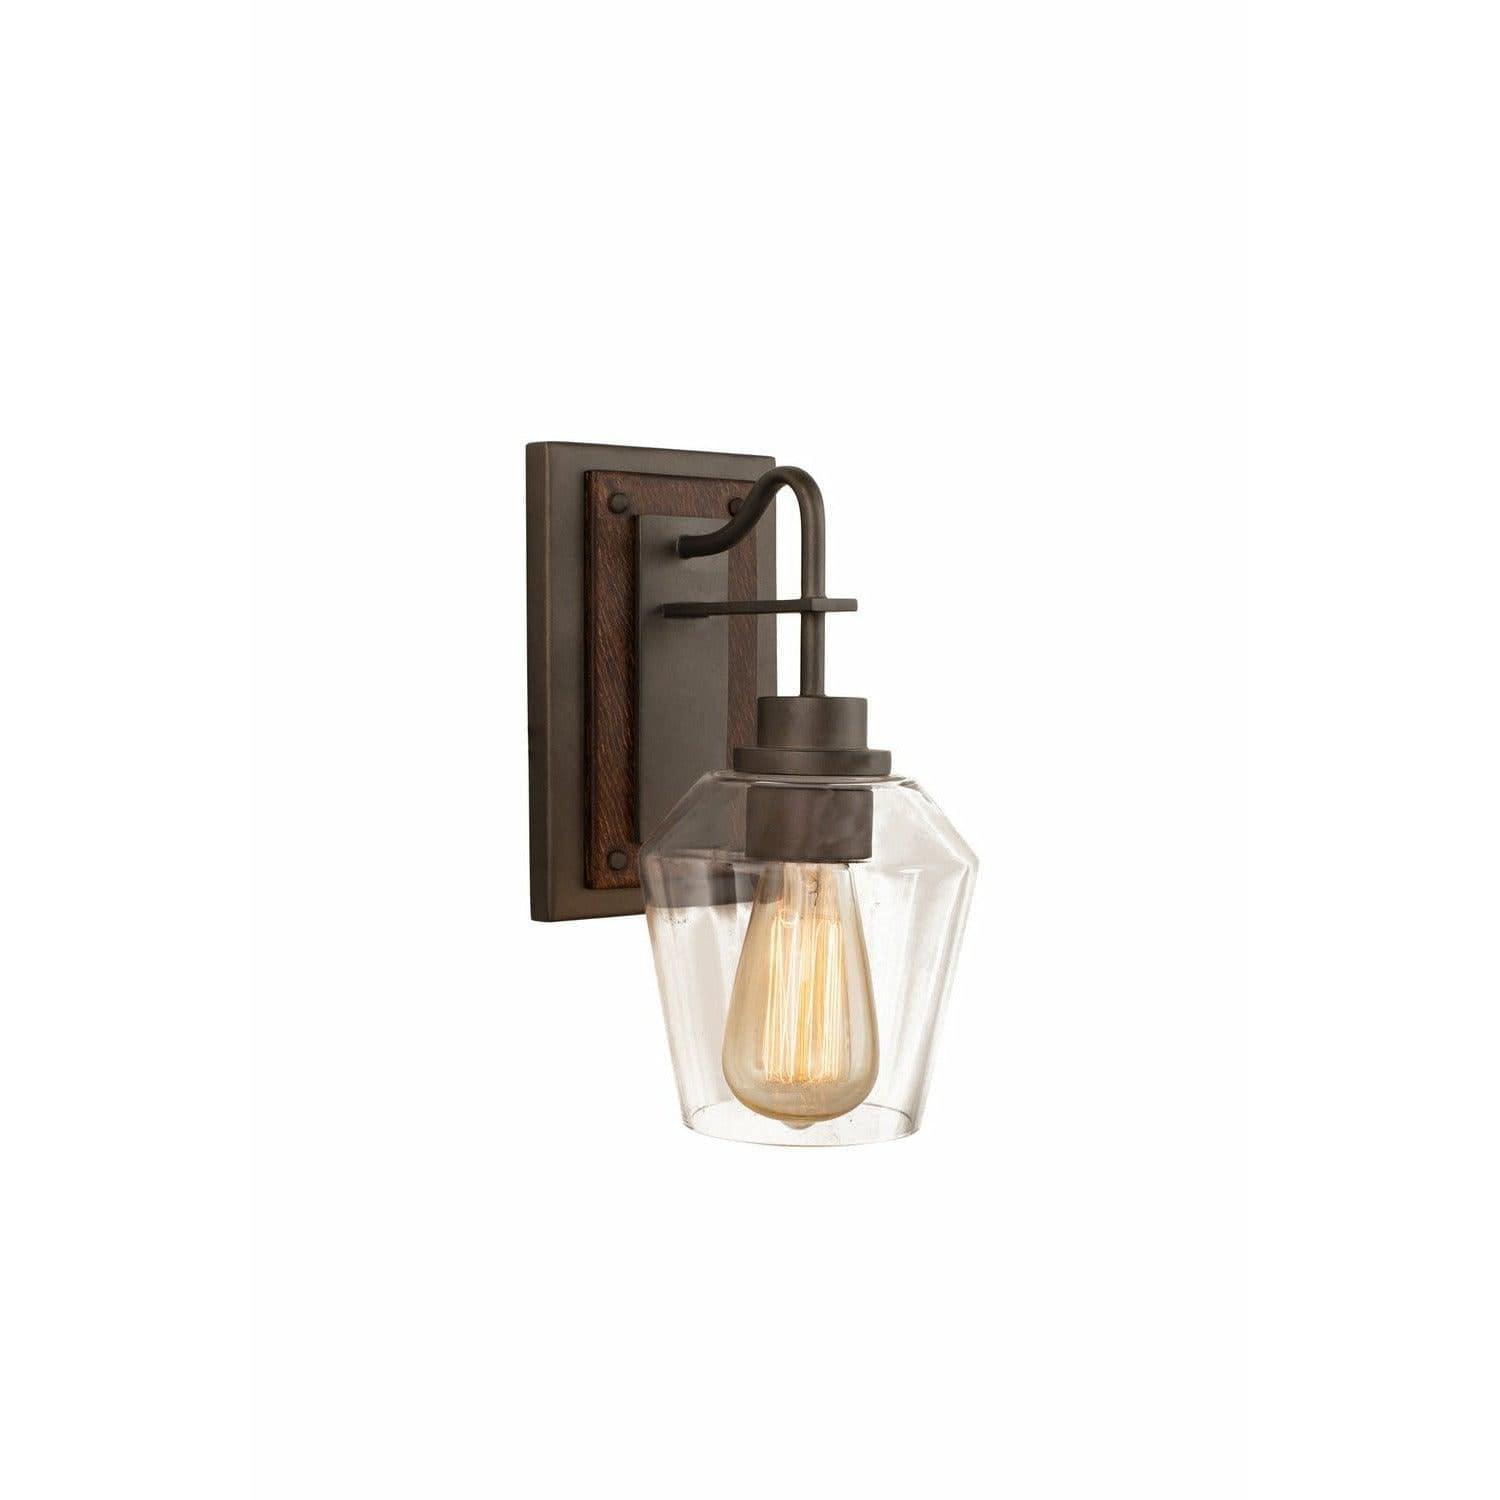 Kalco - Allegheny Wall Sconce - 508720BS | Montreal Lighting & Hardware